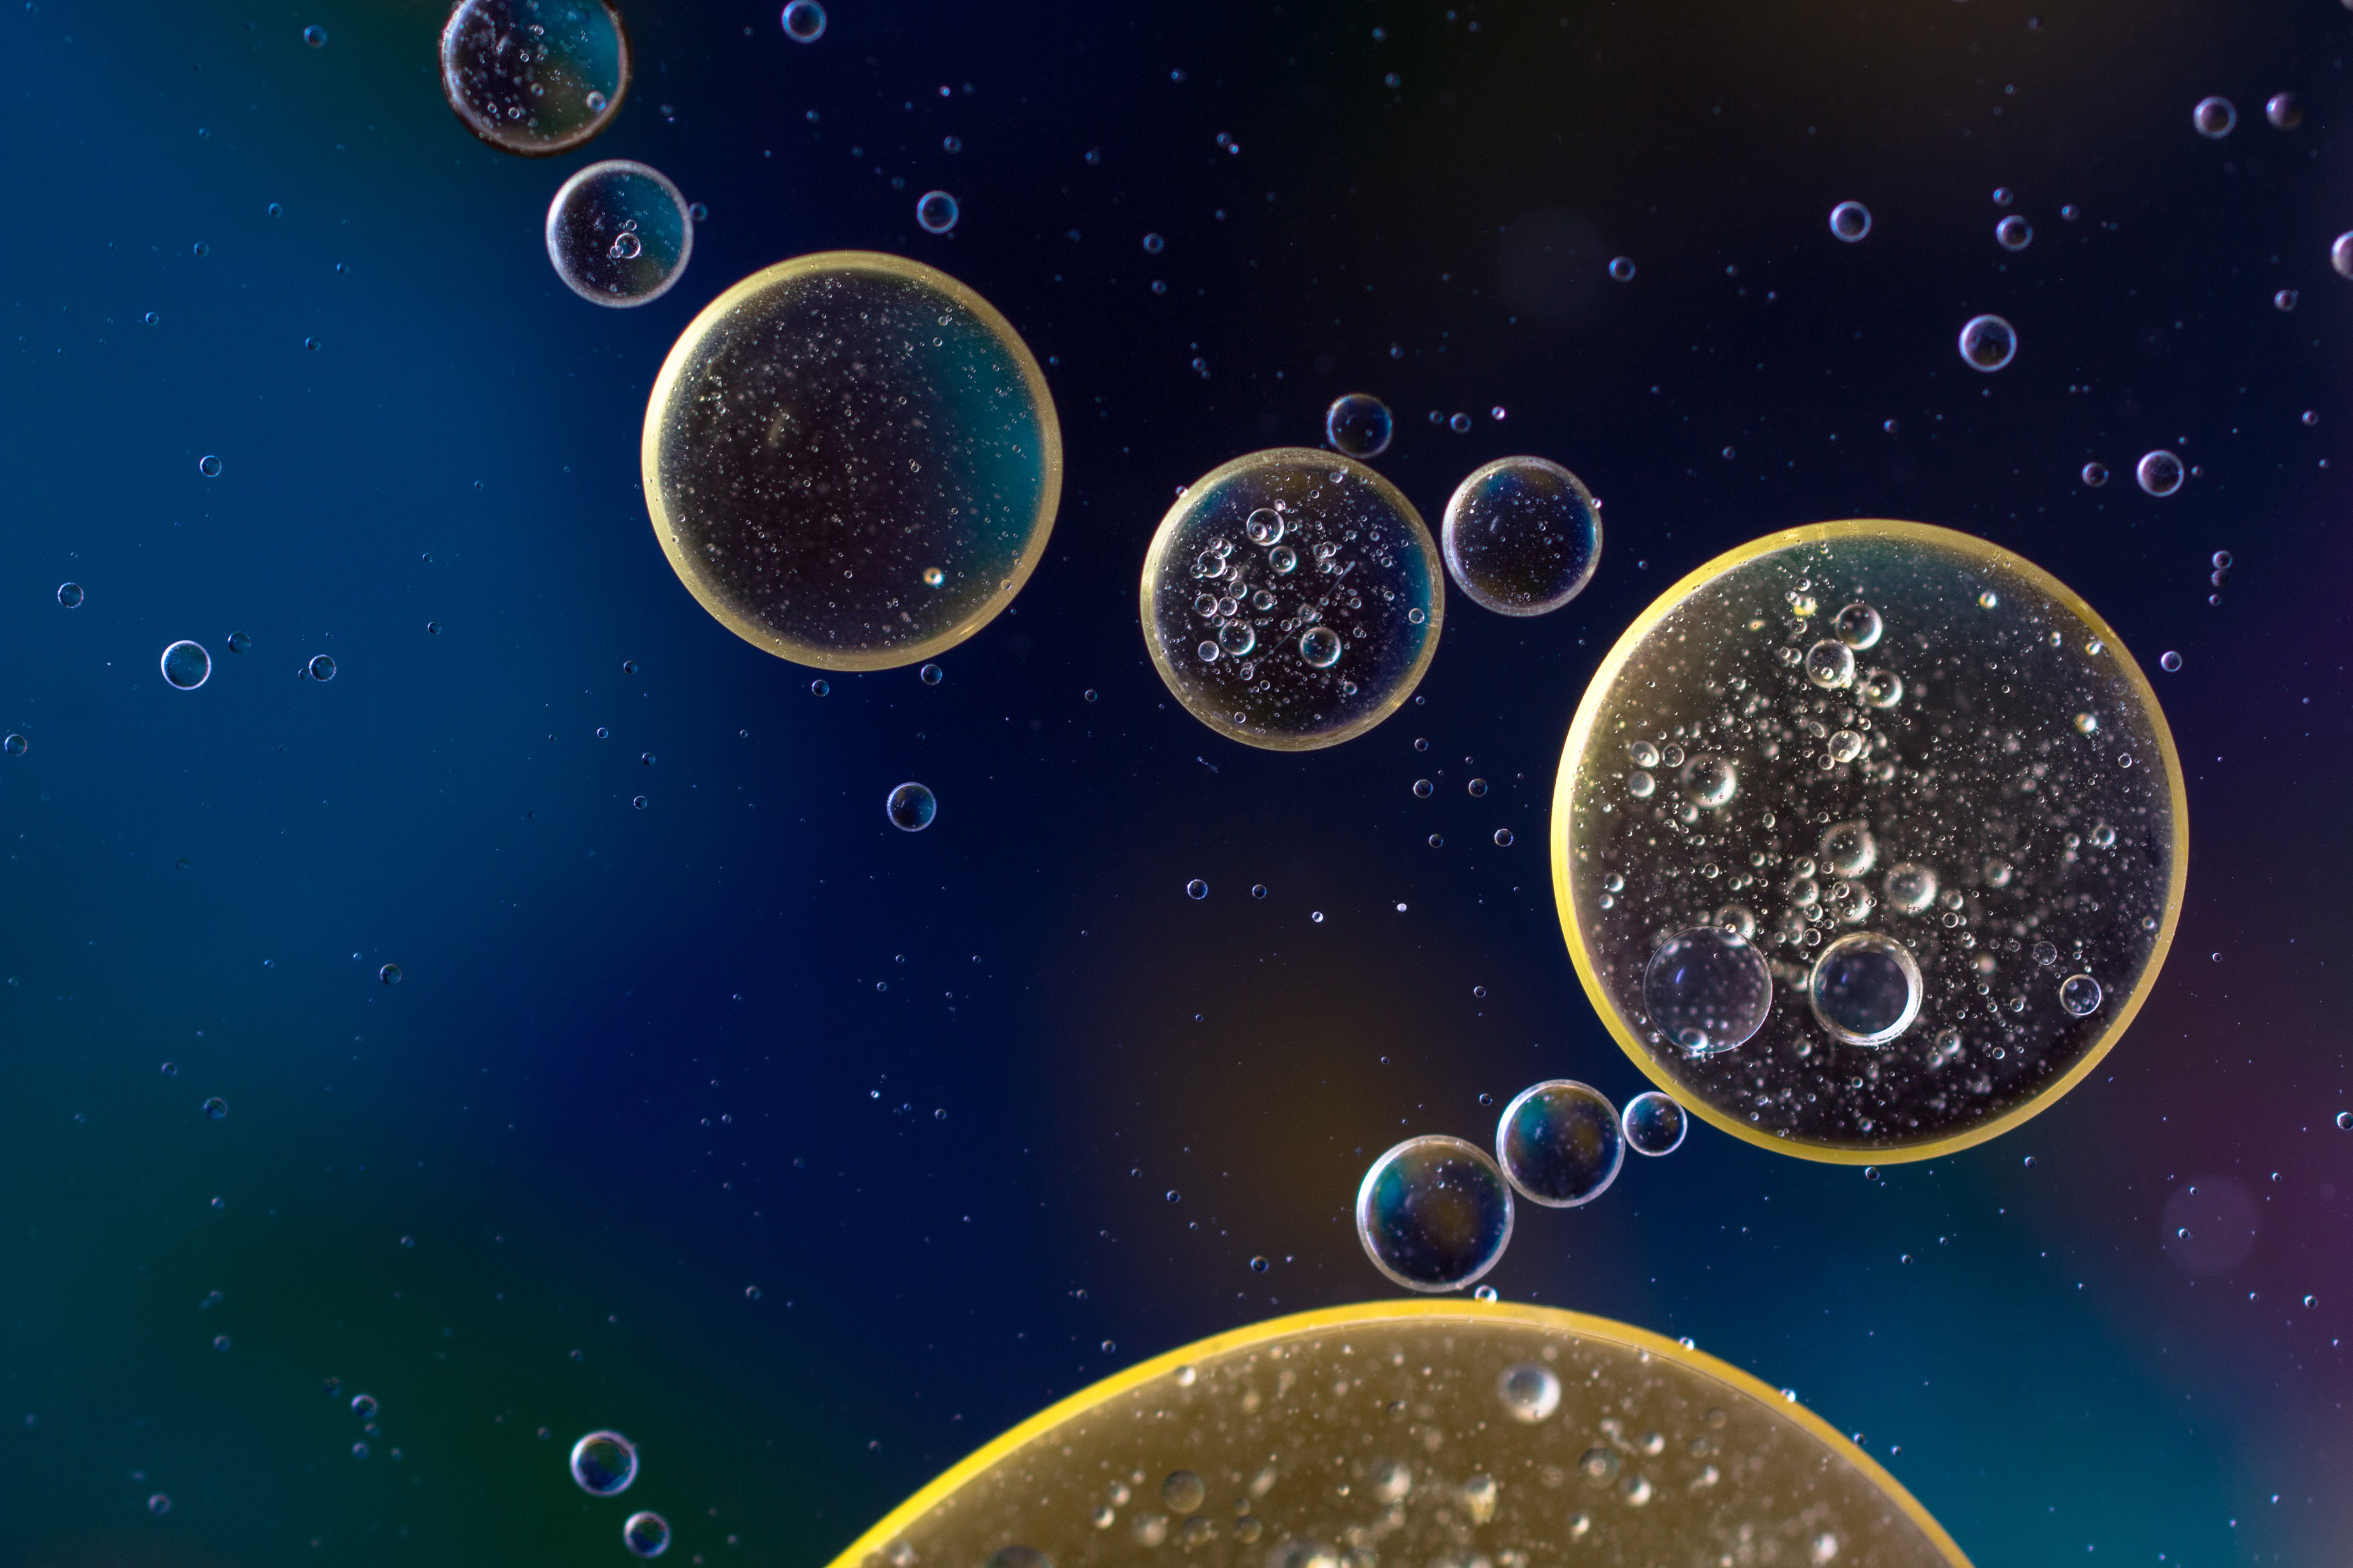 Oil Droplets in Water image - Free stock photo - Public Domain photo ...